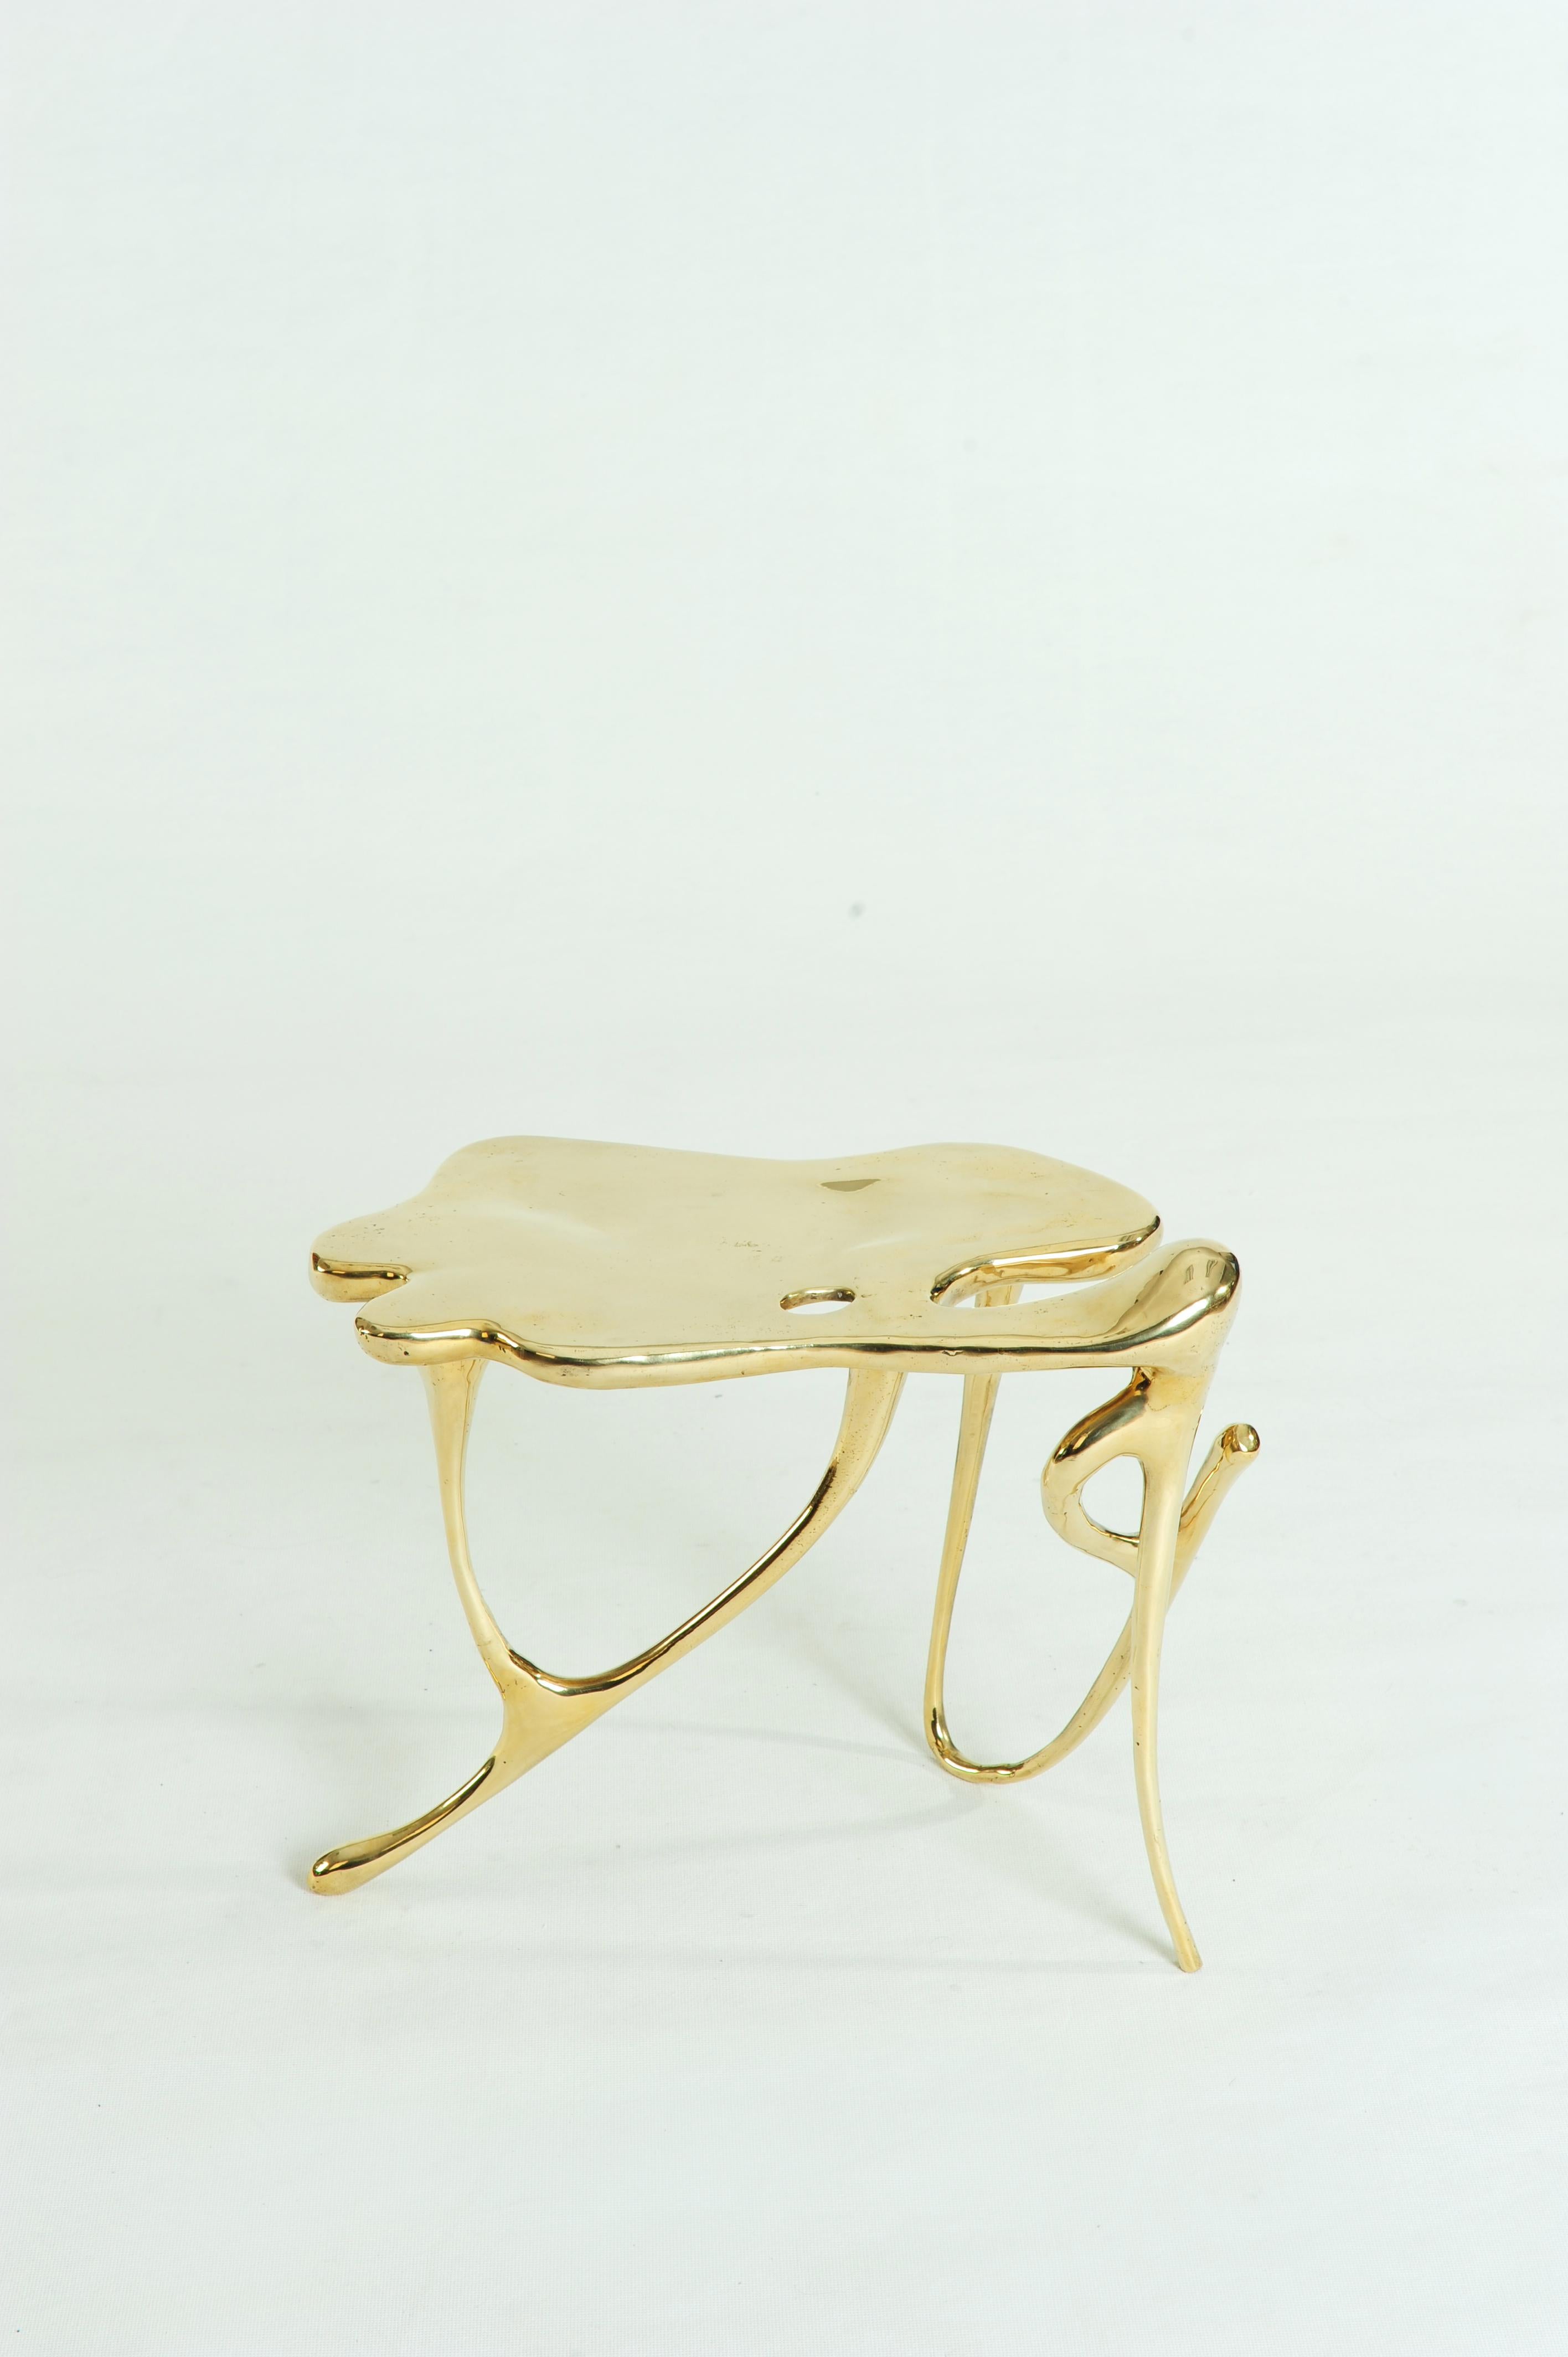 Calligraphic Sculpted Brass Side Table by Misaya For Sale 4